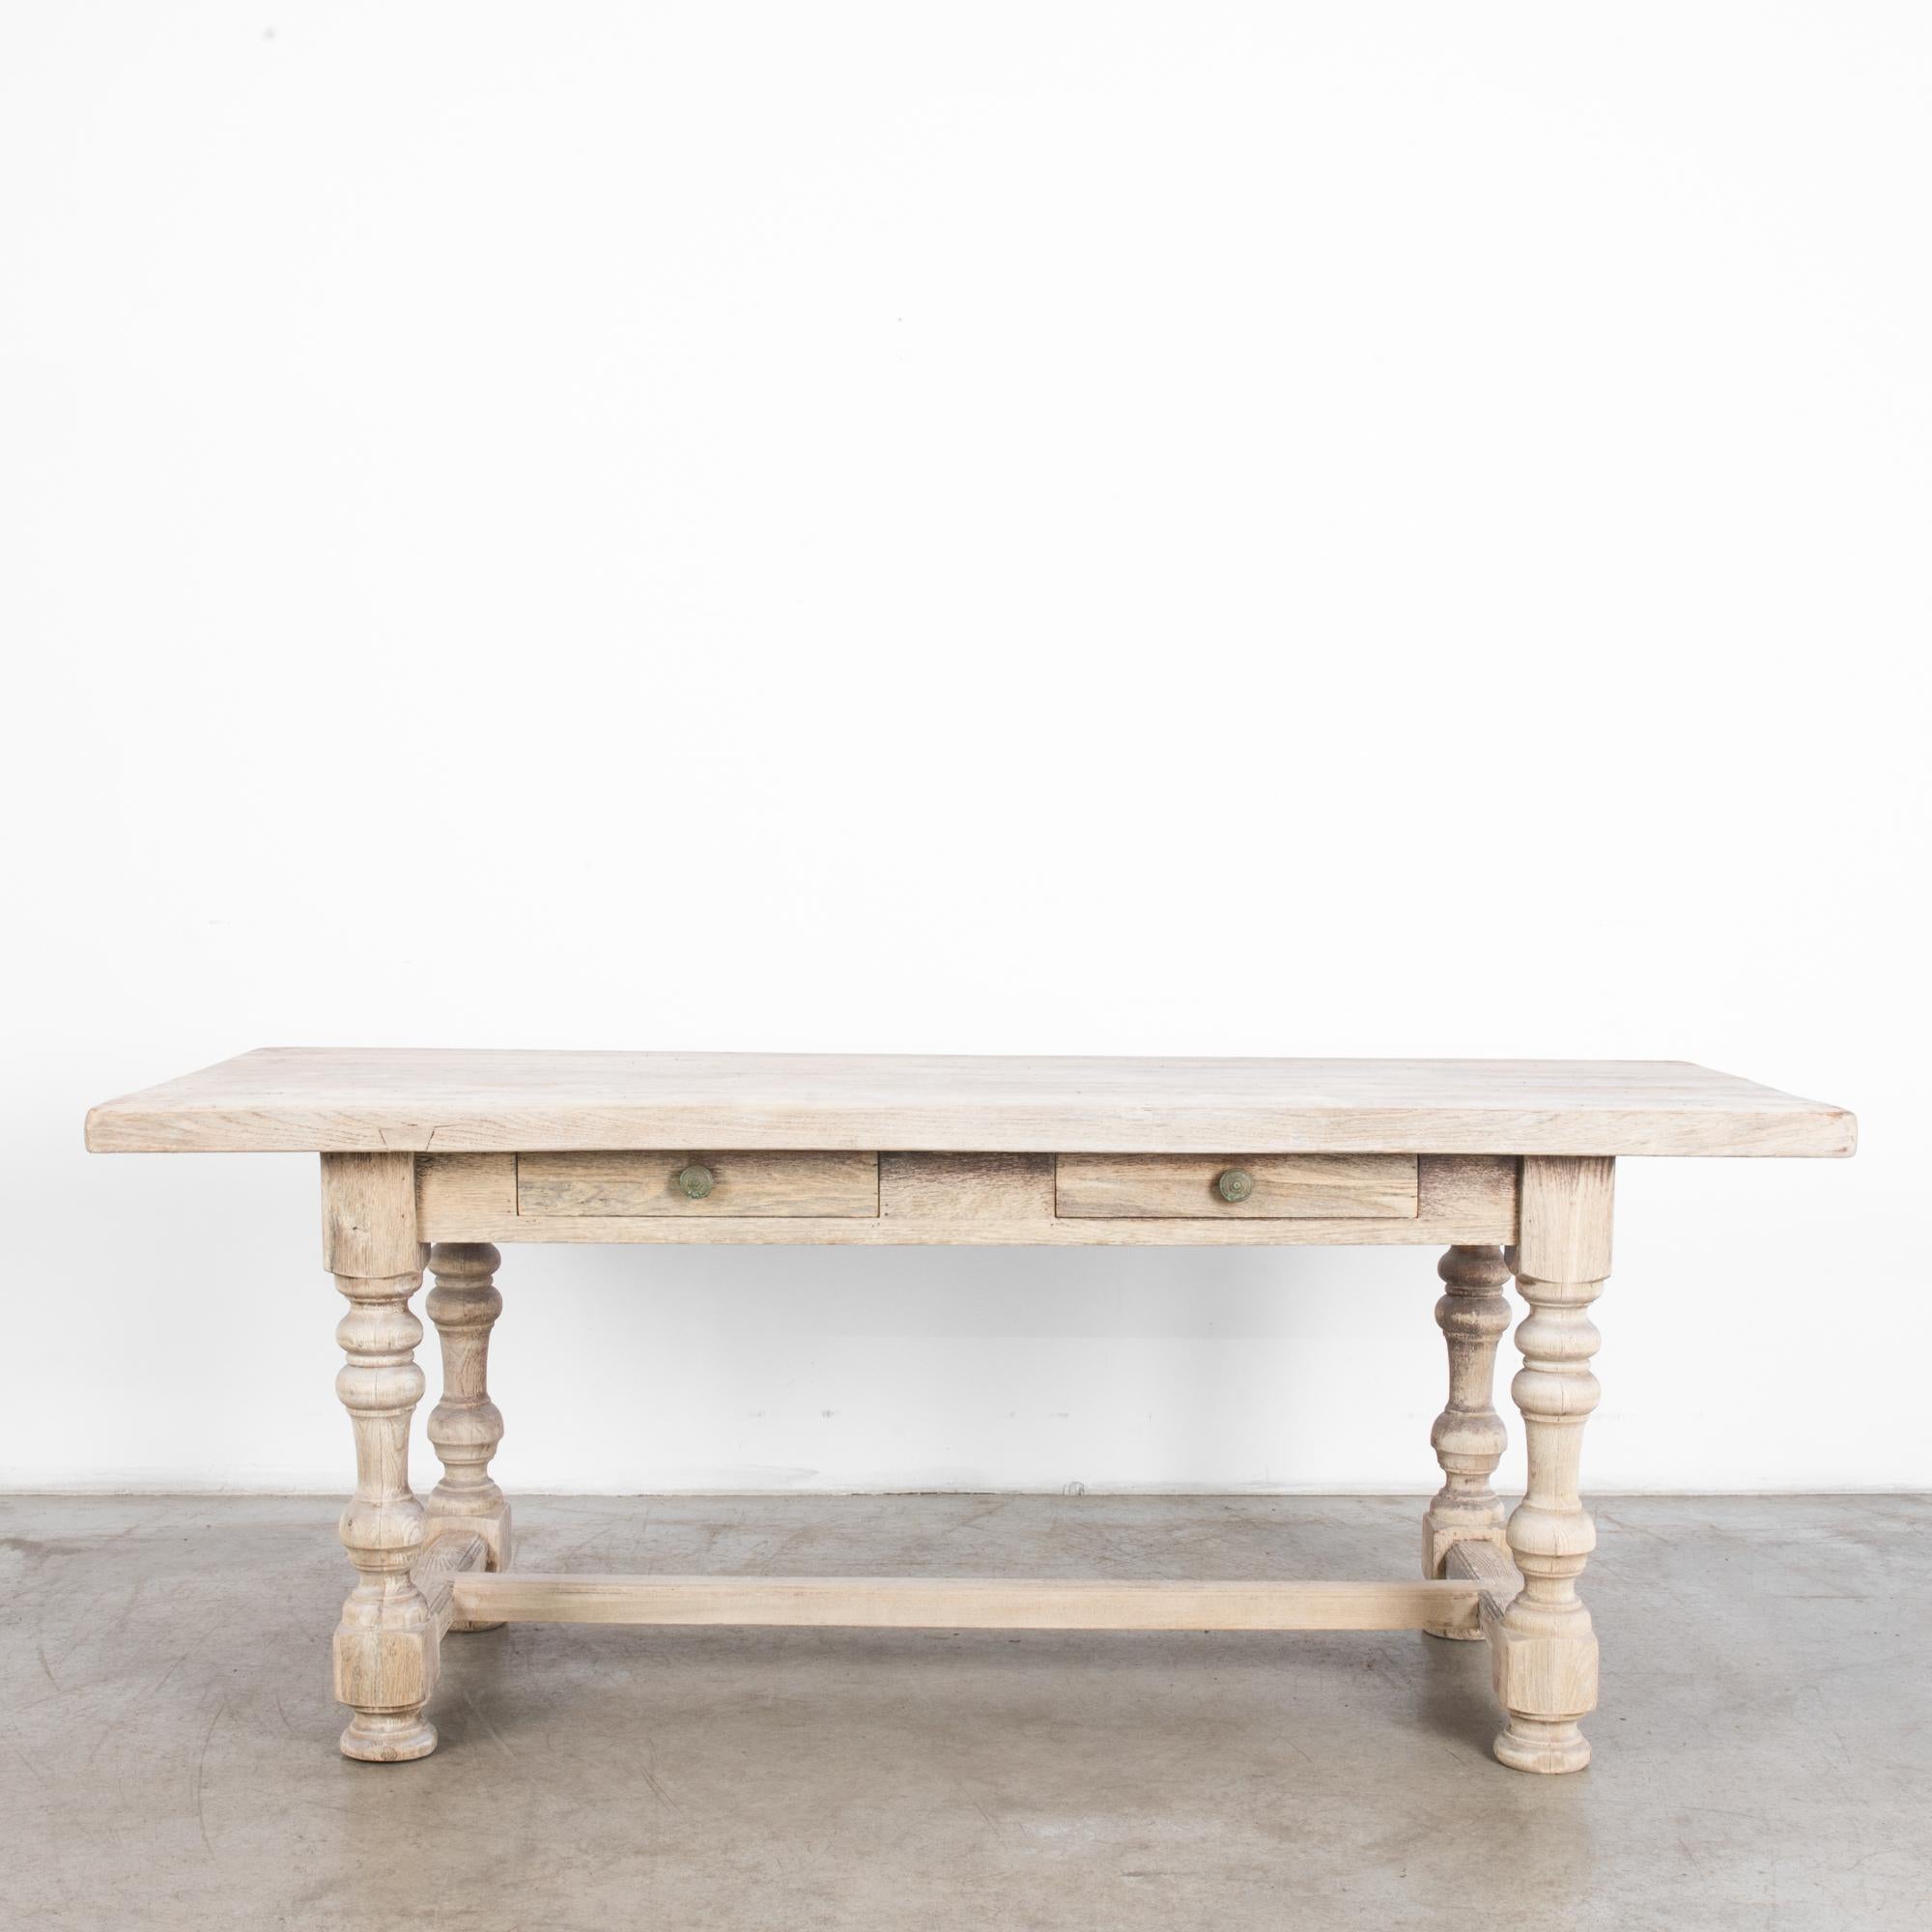 A wooden dining table from 1950s France, made of bleached oak. Sturdy turned table legs support a broad tabletop. A square apron hosts two small drawers. With the robust proportions of countryside practicality, a bright bleached oak finish gives